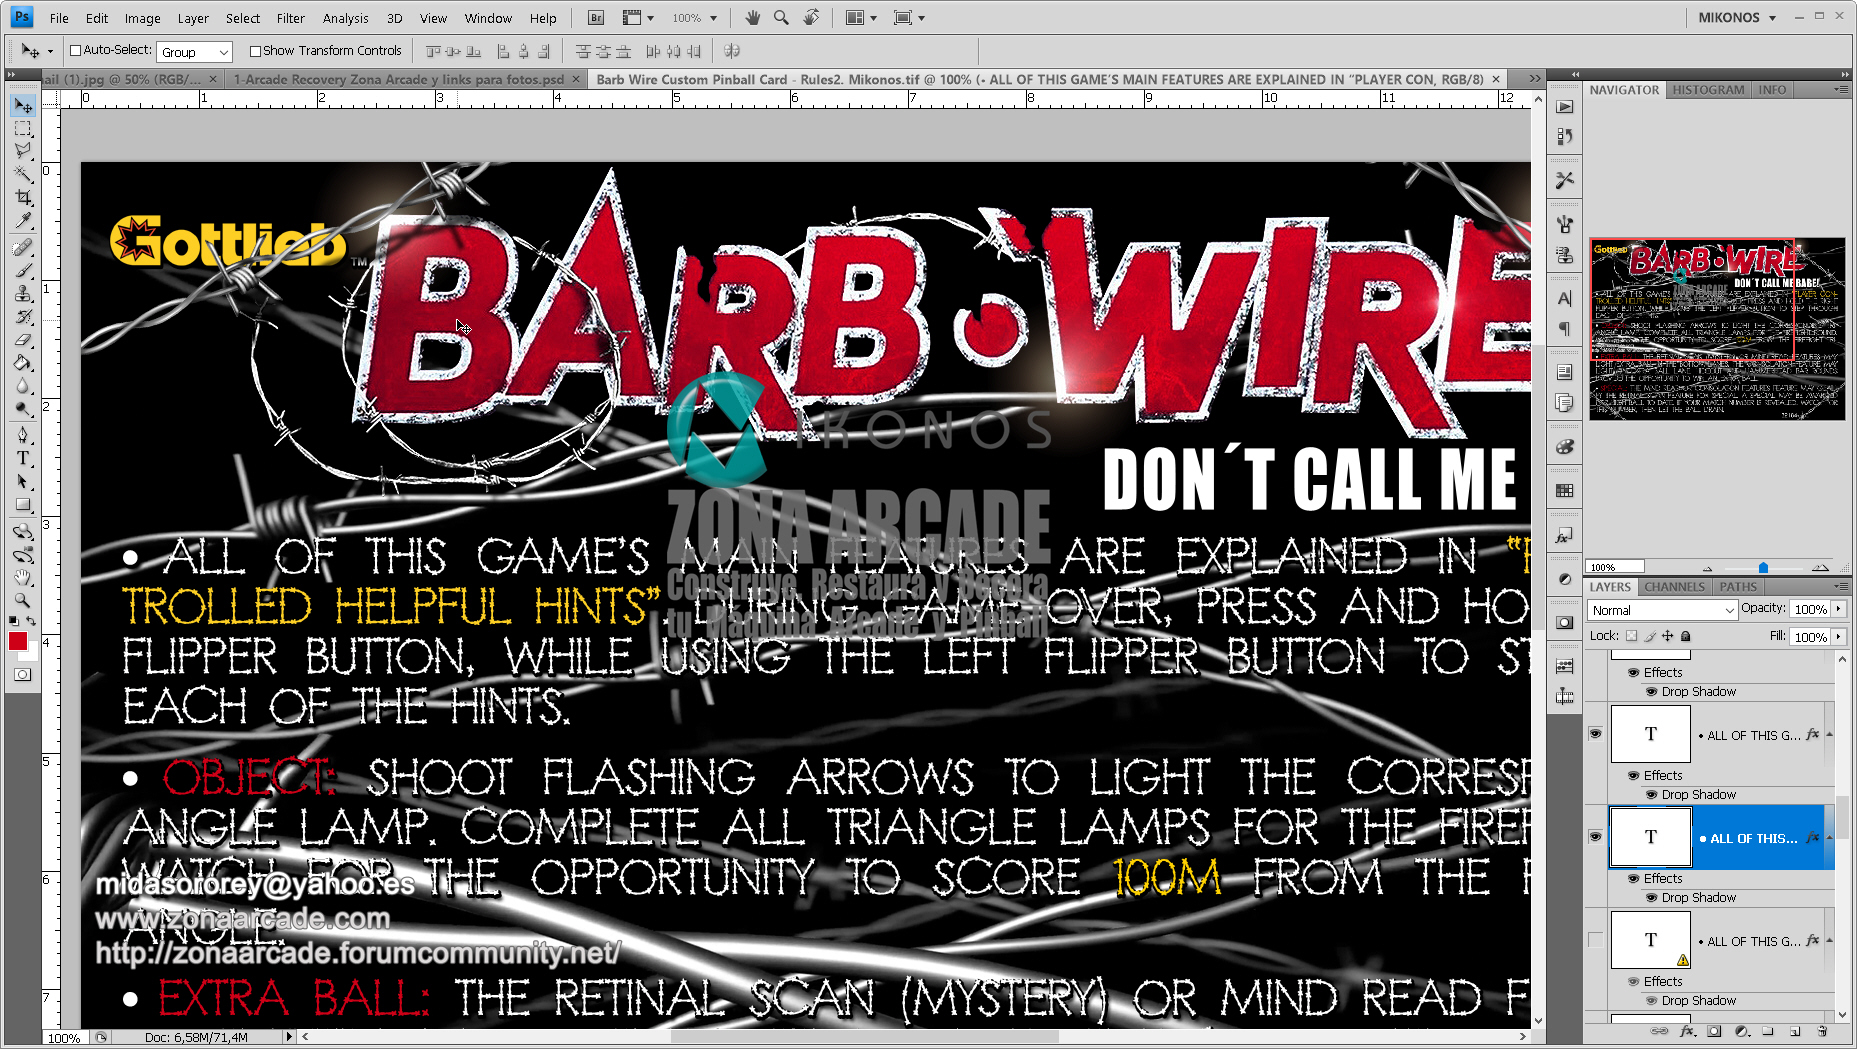 Barb Wire Pinball Card Customized - Rules2. Mikonos2